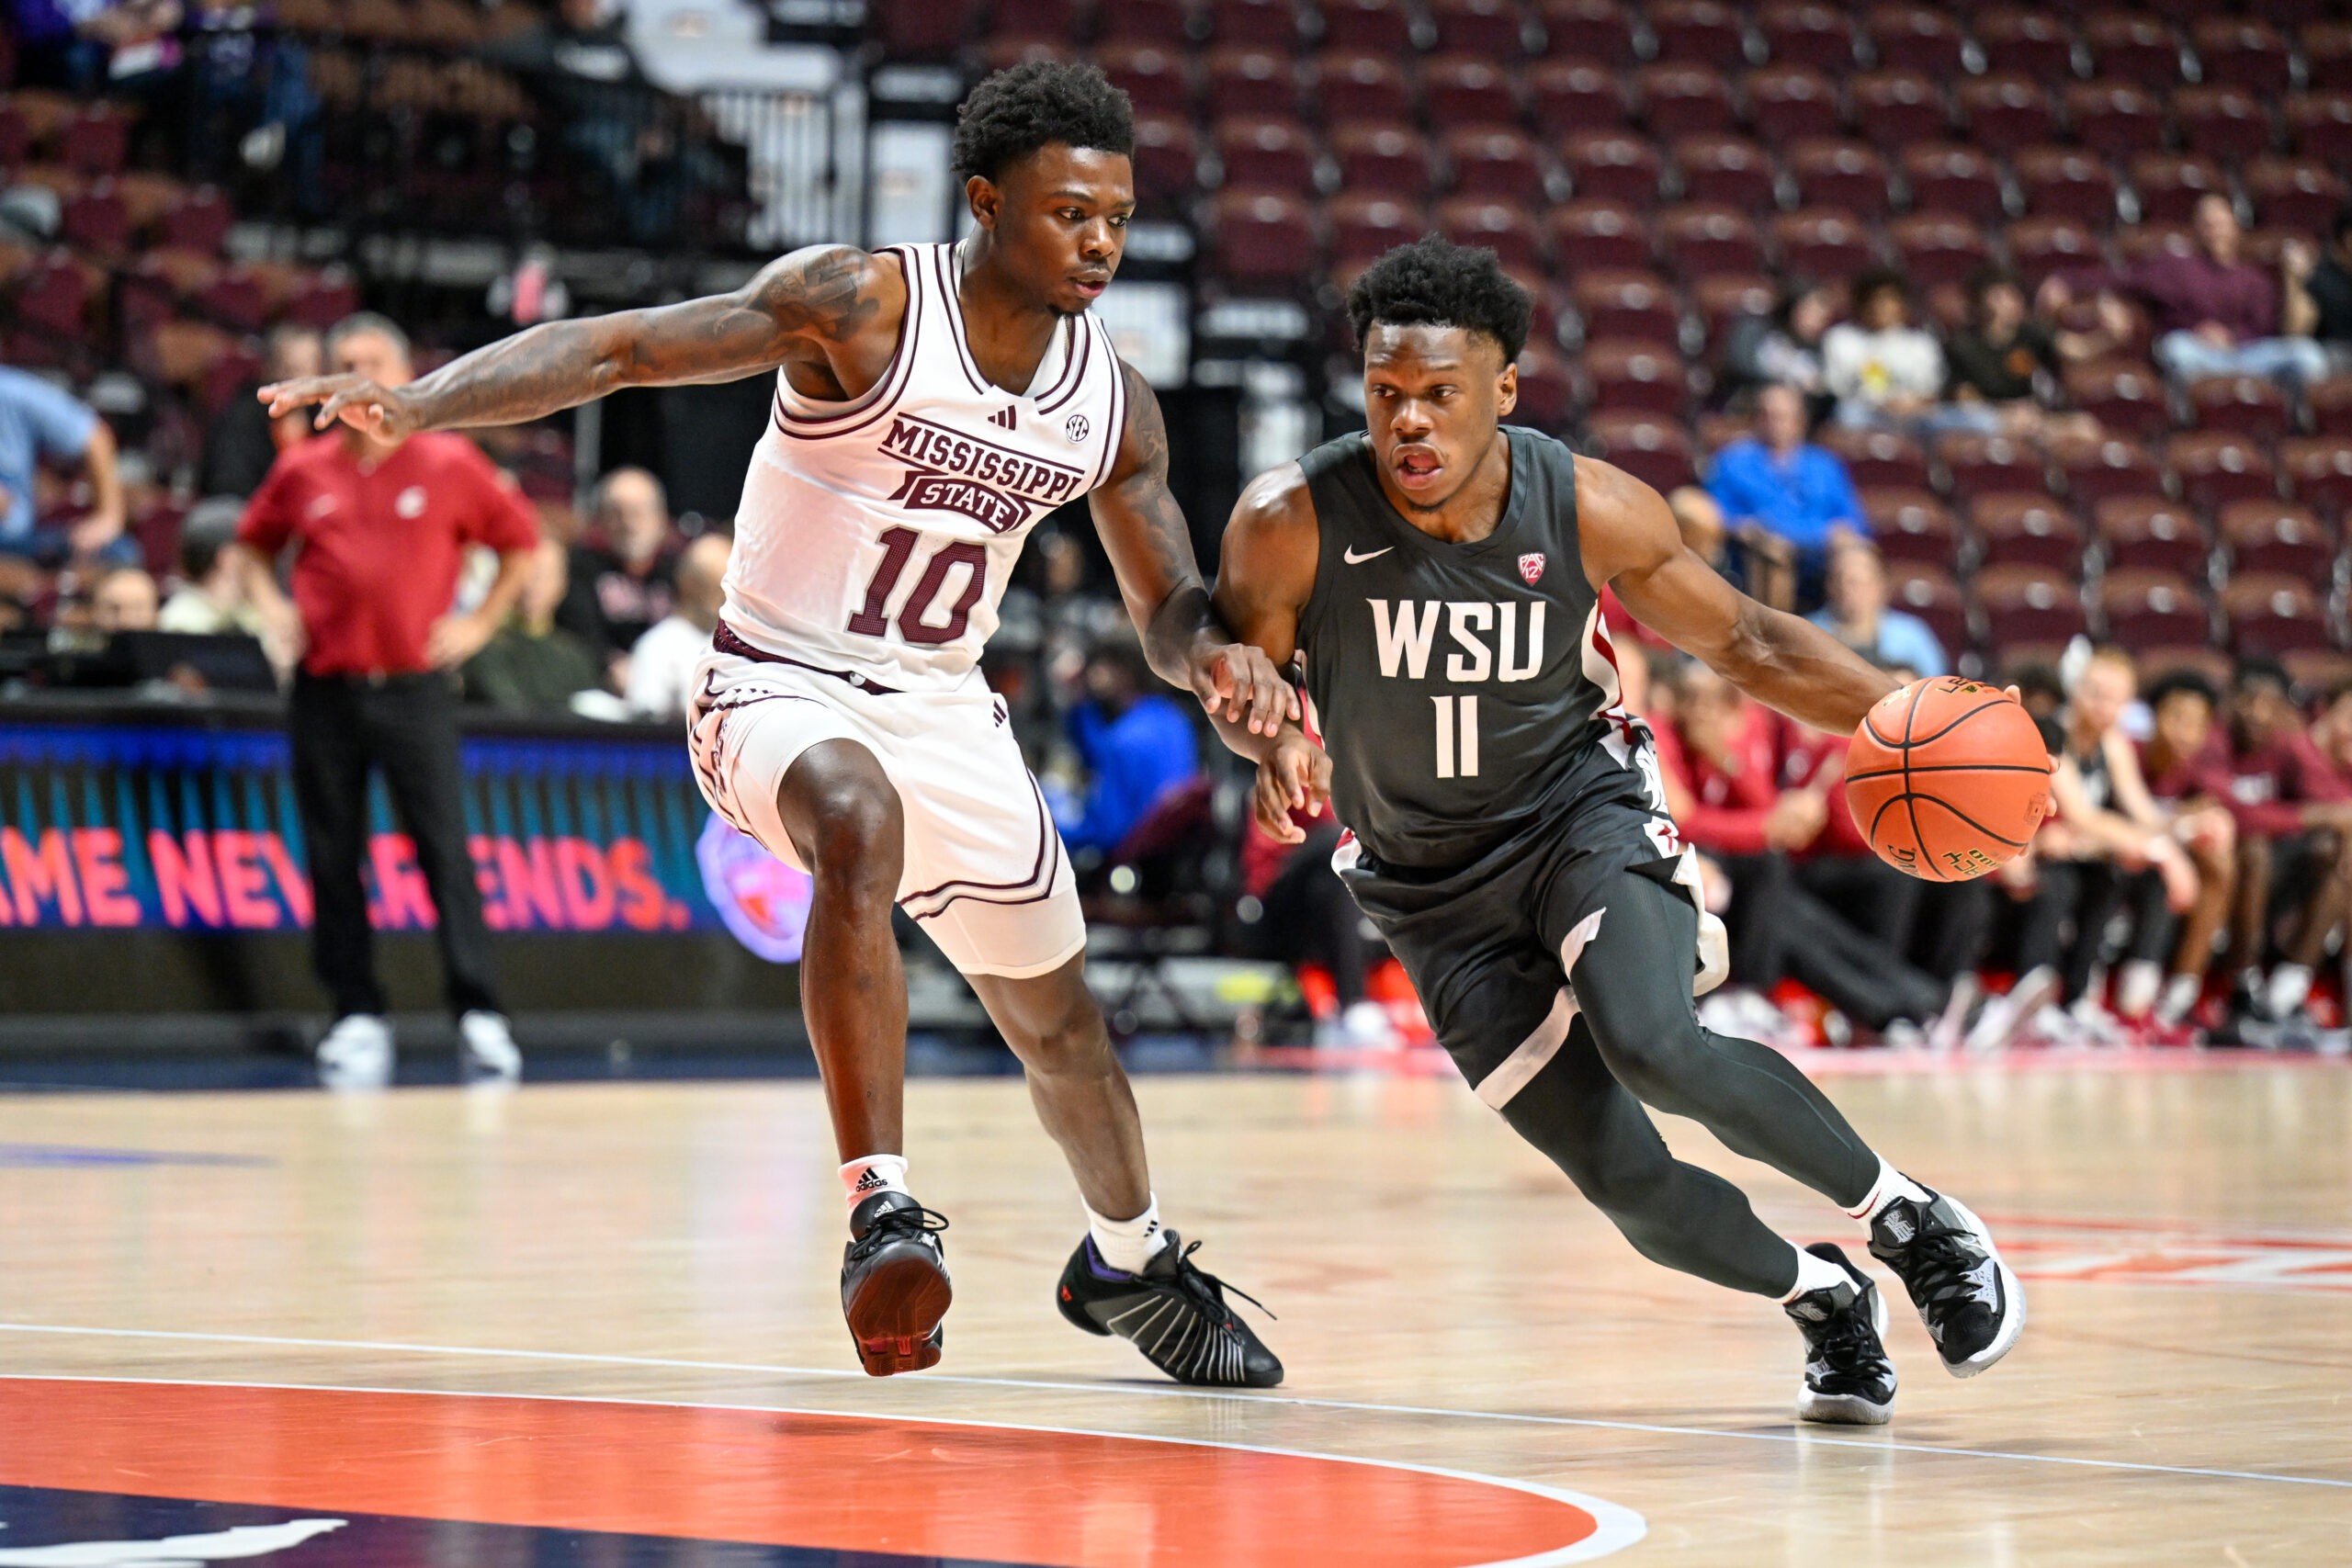 NCAA Basketball: Basketball Hall of Fame Tip-Off Mississippi State at Washington State